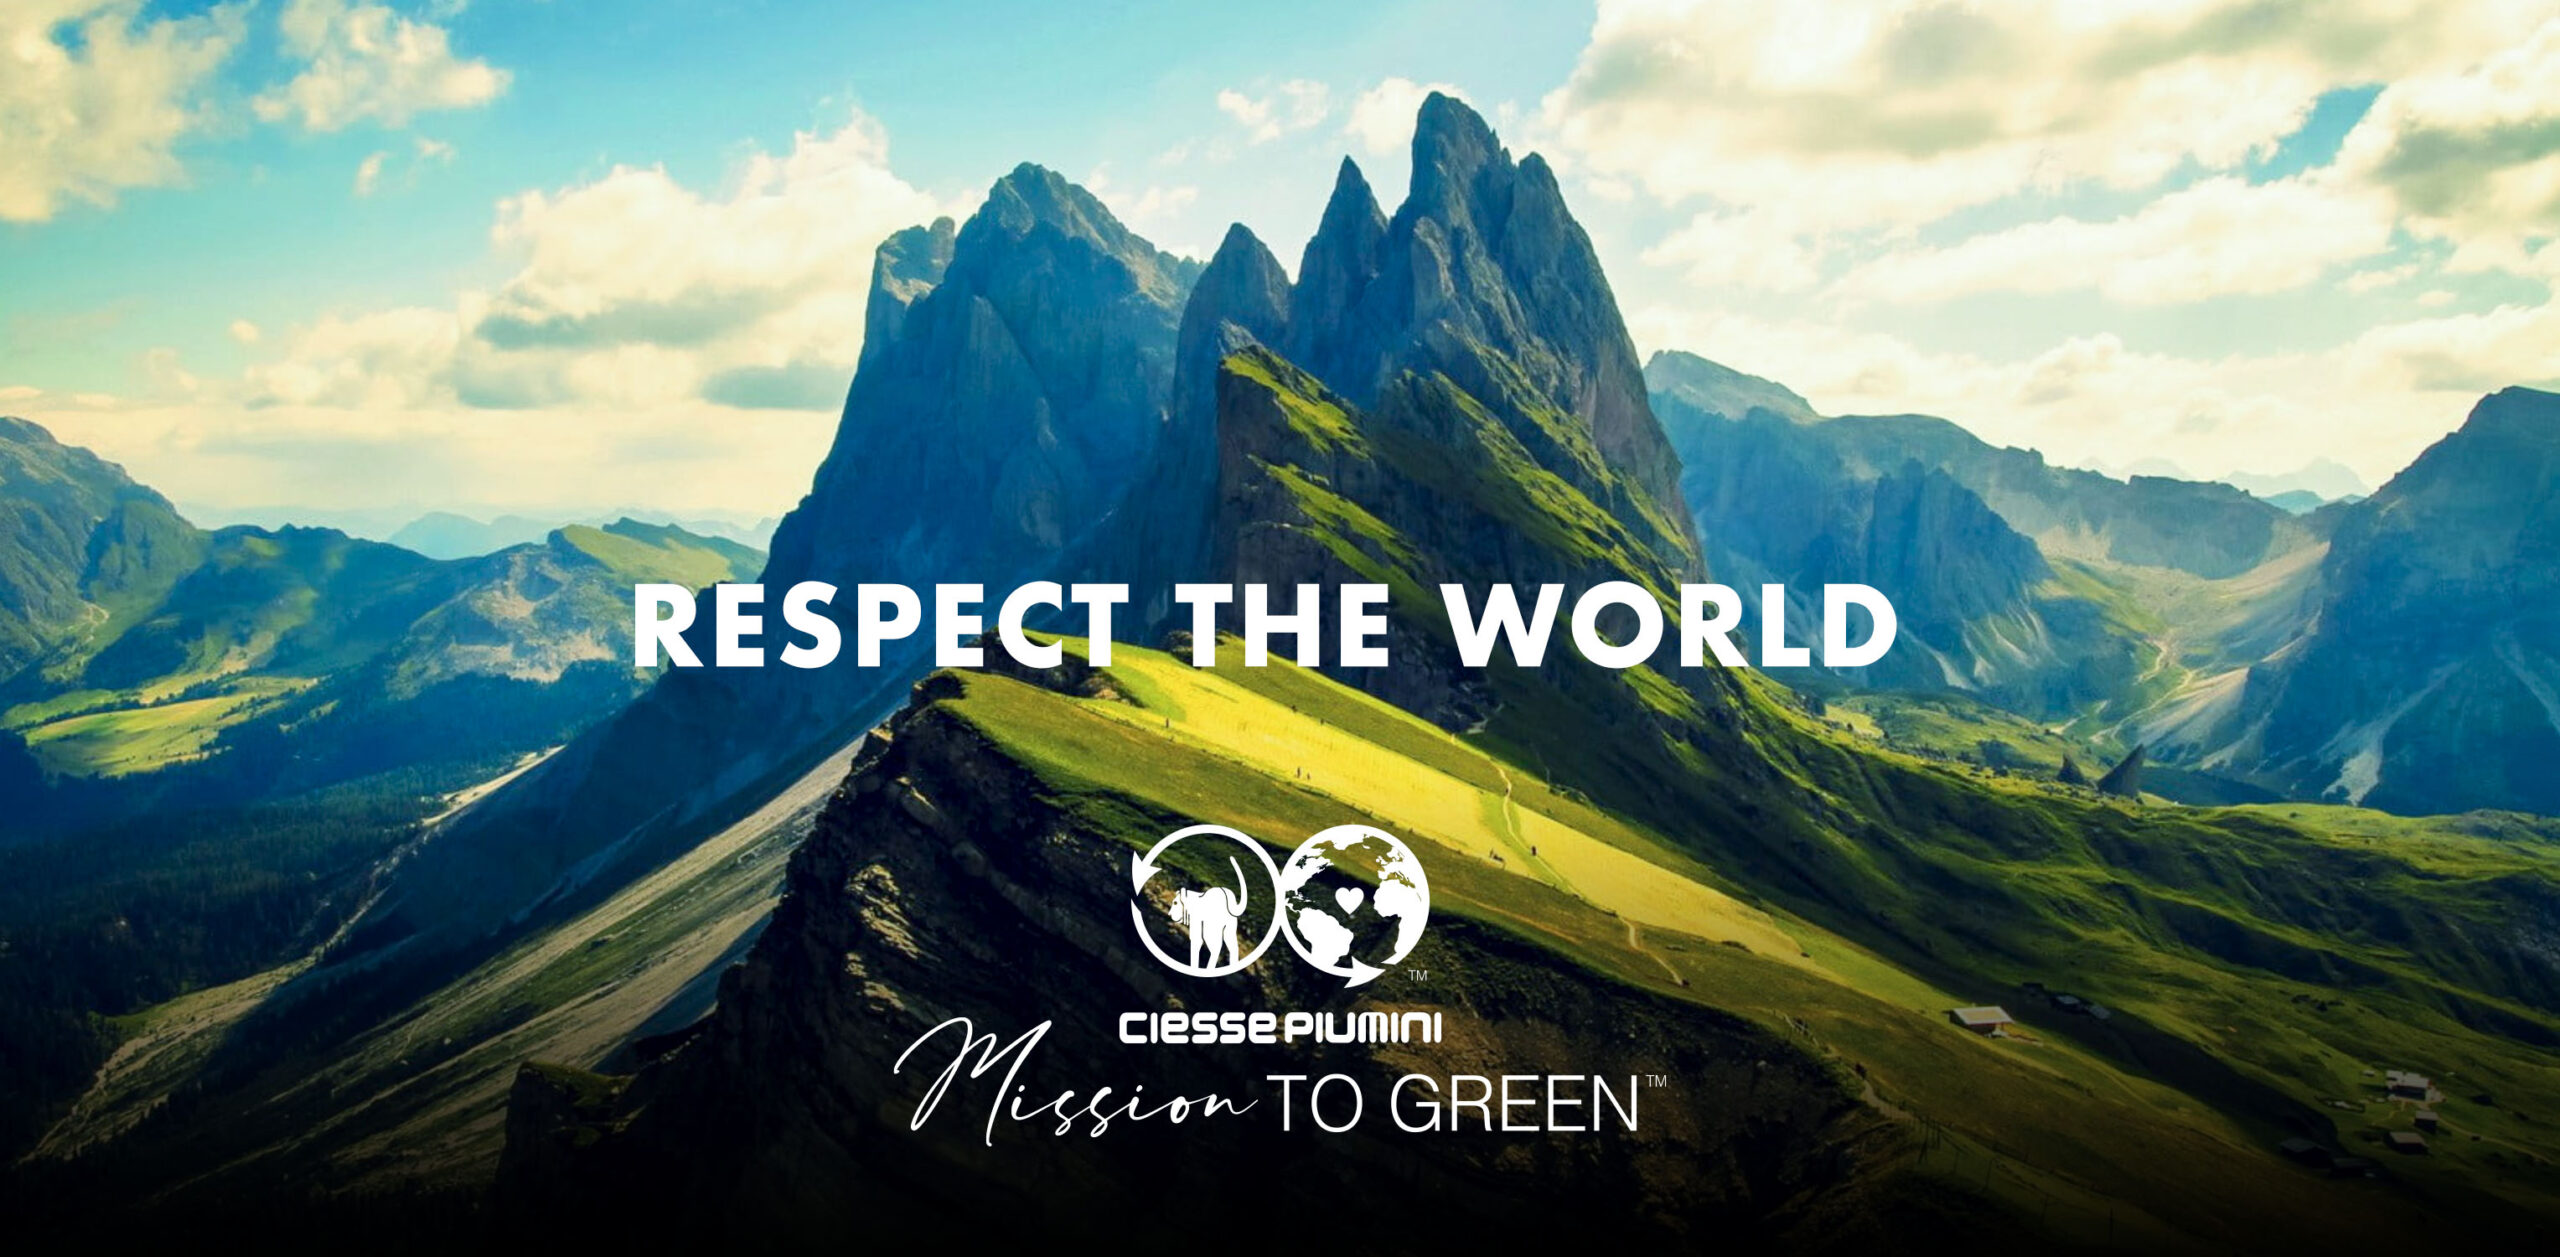 ciesse piumini mission to green banner scaled Mission to Green